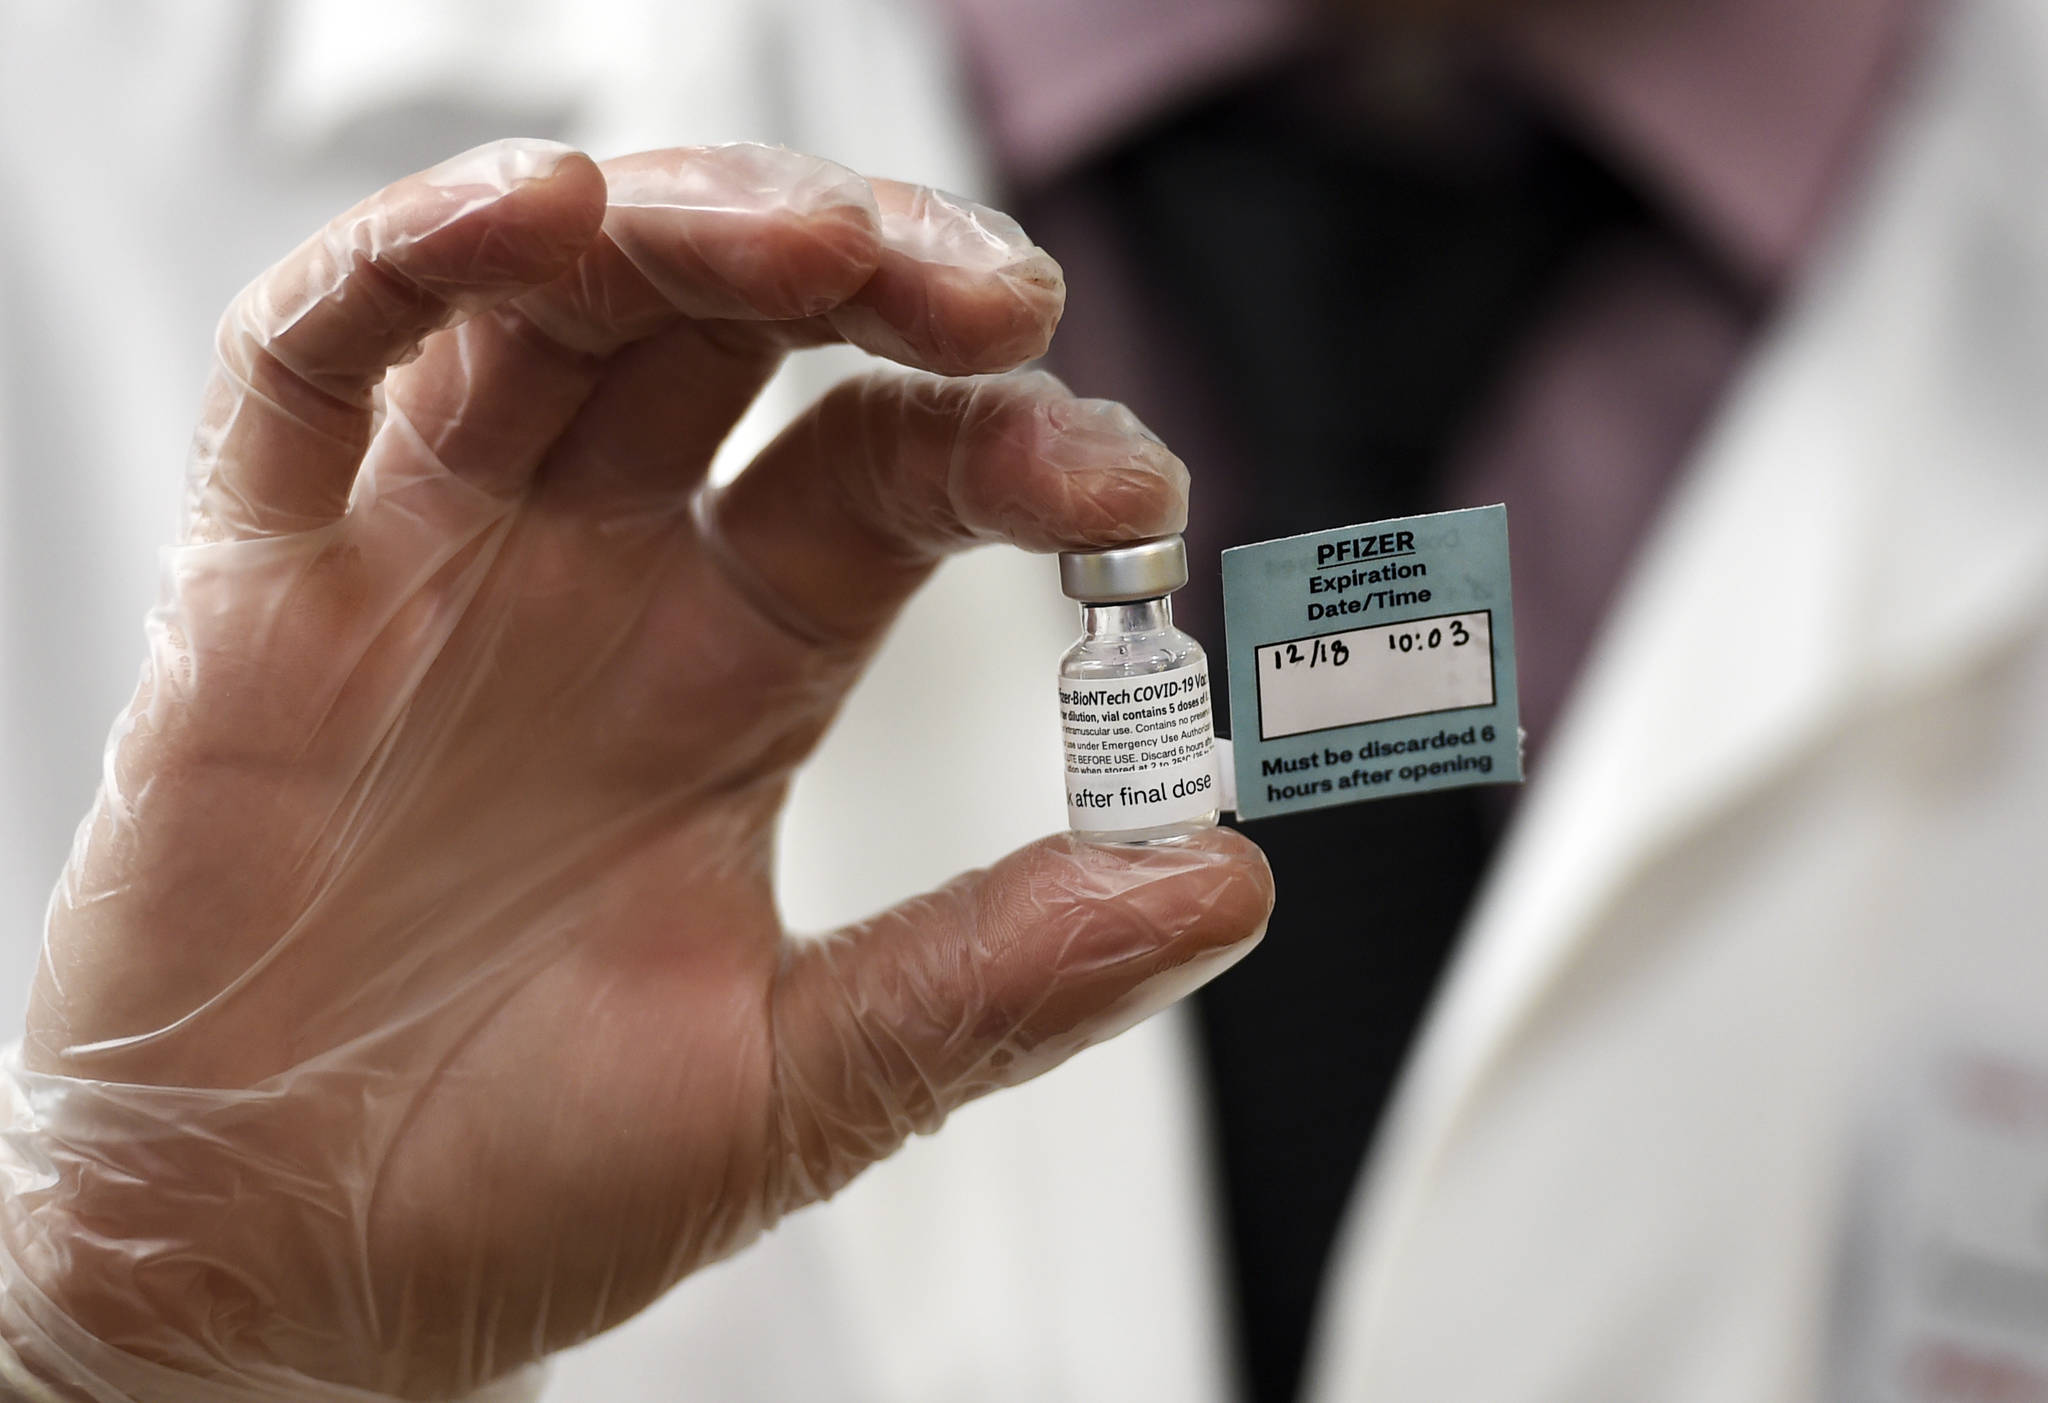 A vial of the Pfizer vaccine used at The Reservoir nursing facility, is shown, Friday, Dec. 18, 2020, in West Hartford, Conn. (AP Photo / Stephen Dunn,Pool)